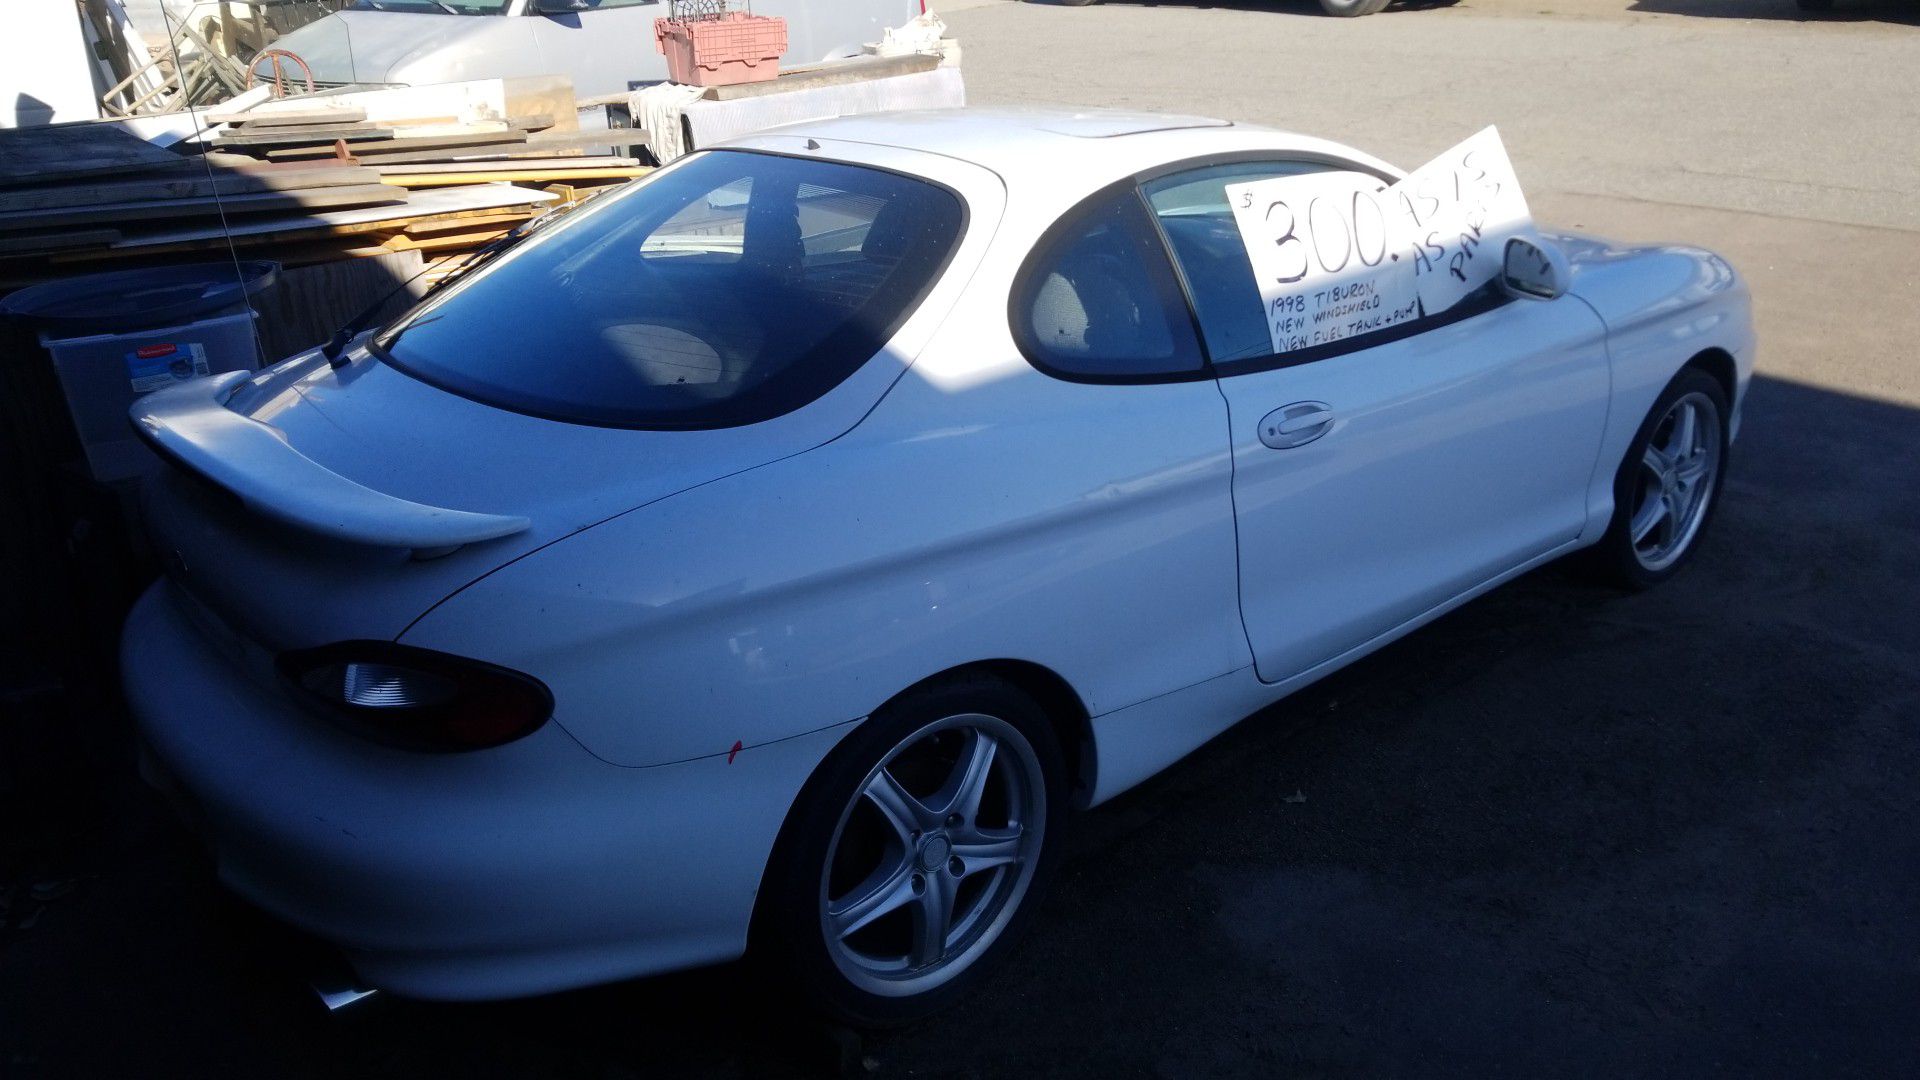 1998 Tiburon as is, as parts, lots new, project car